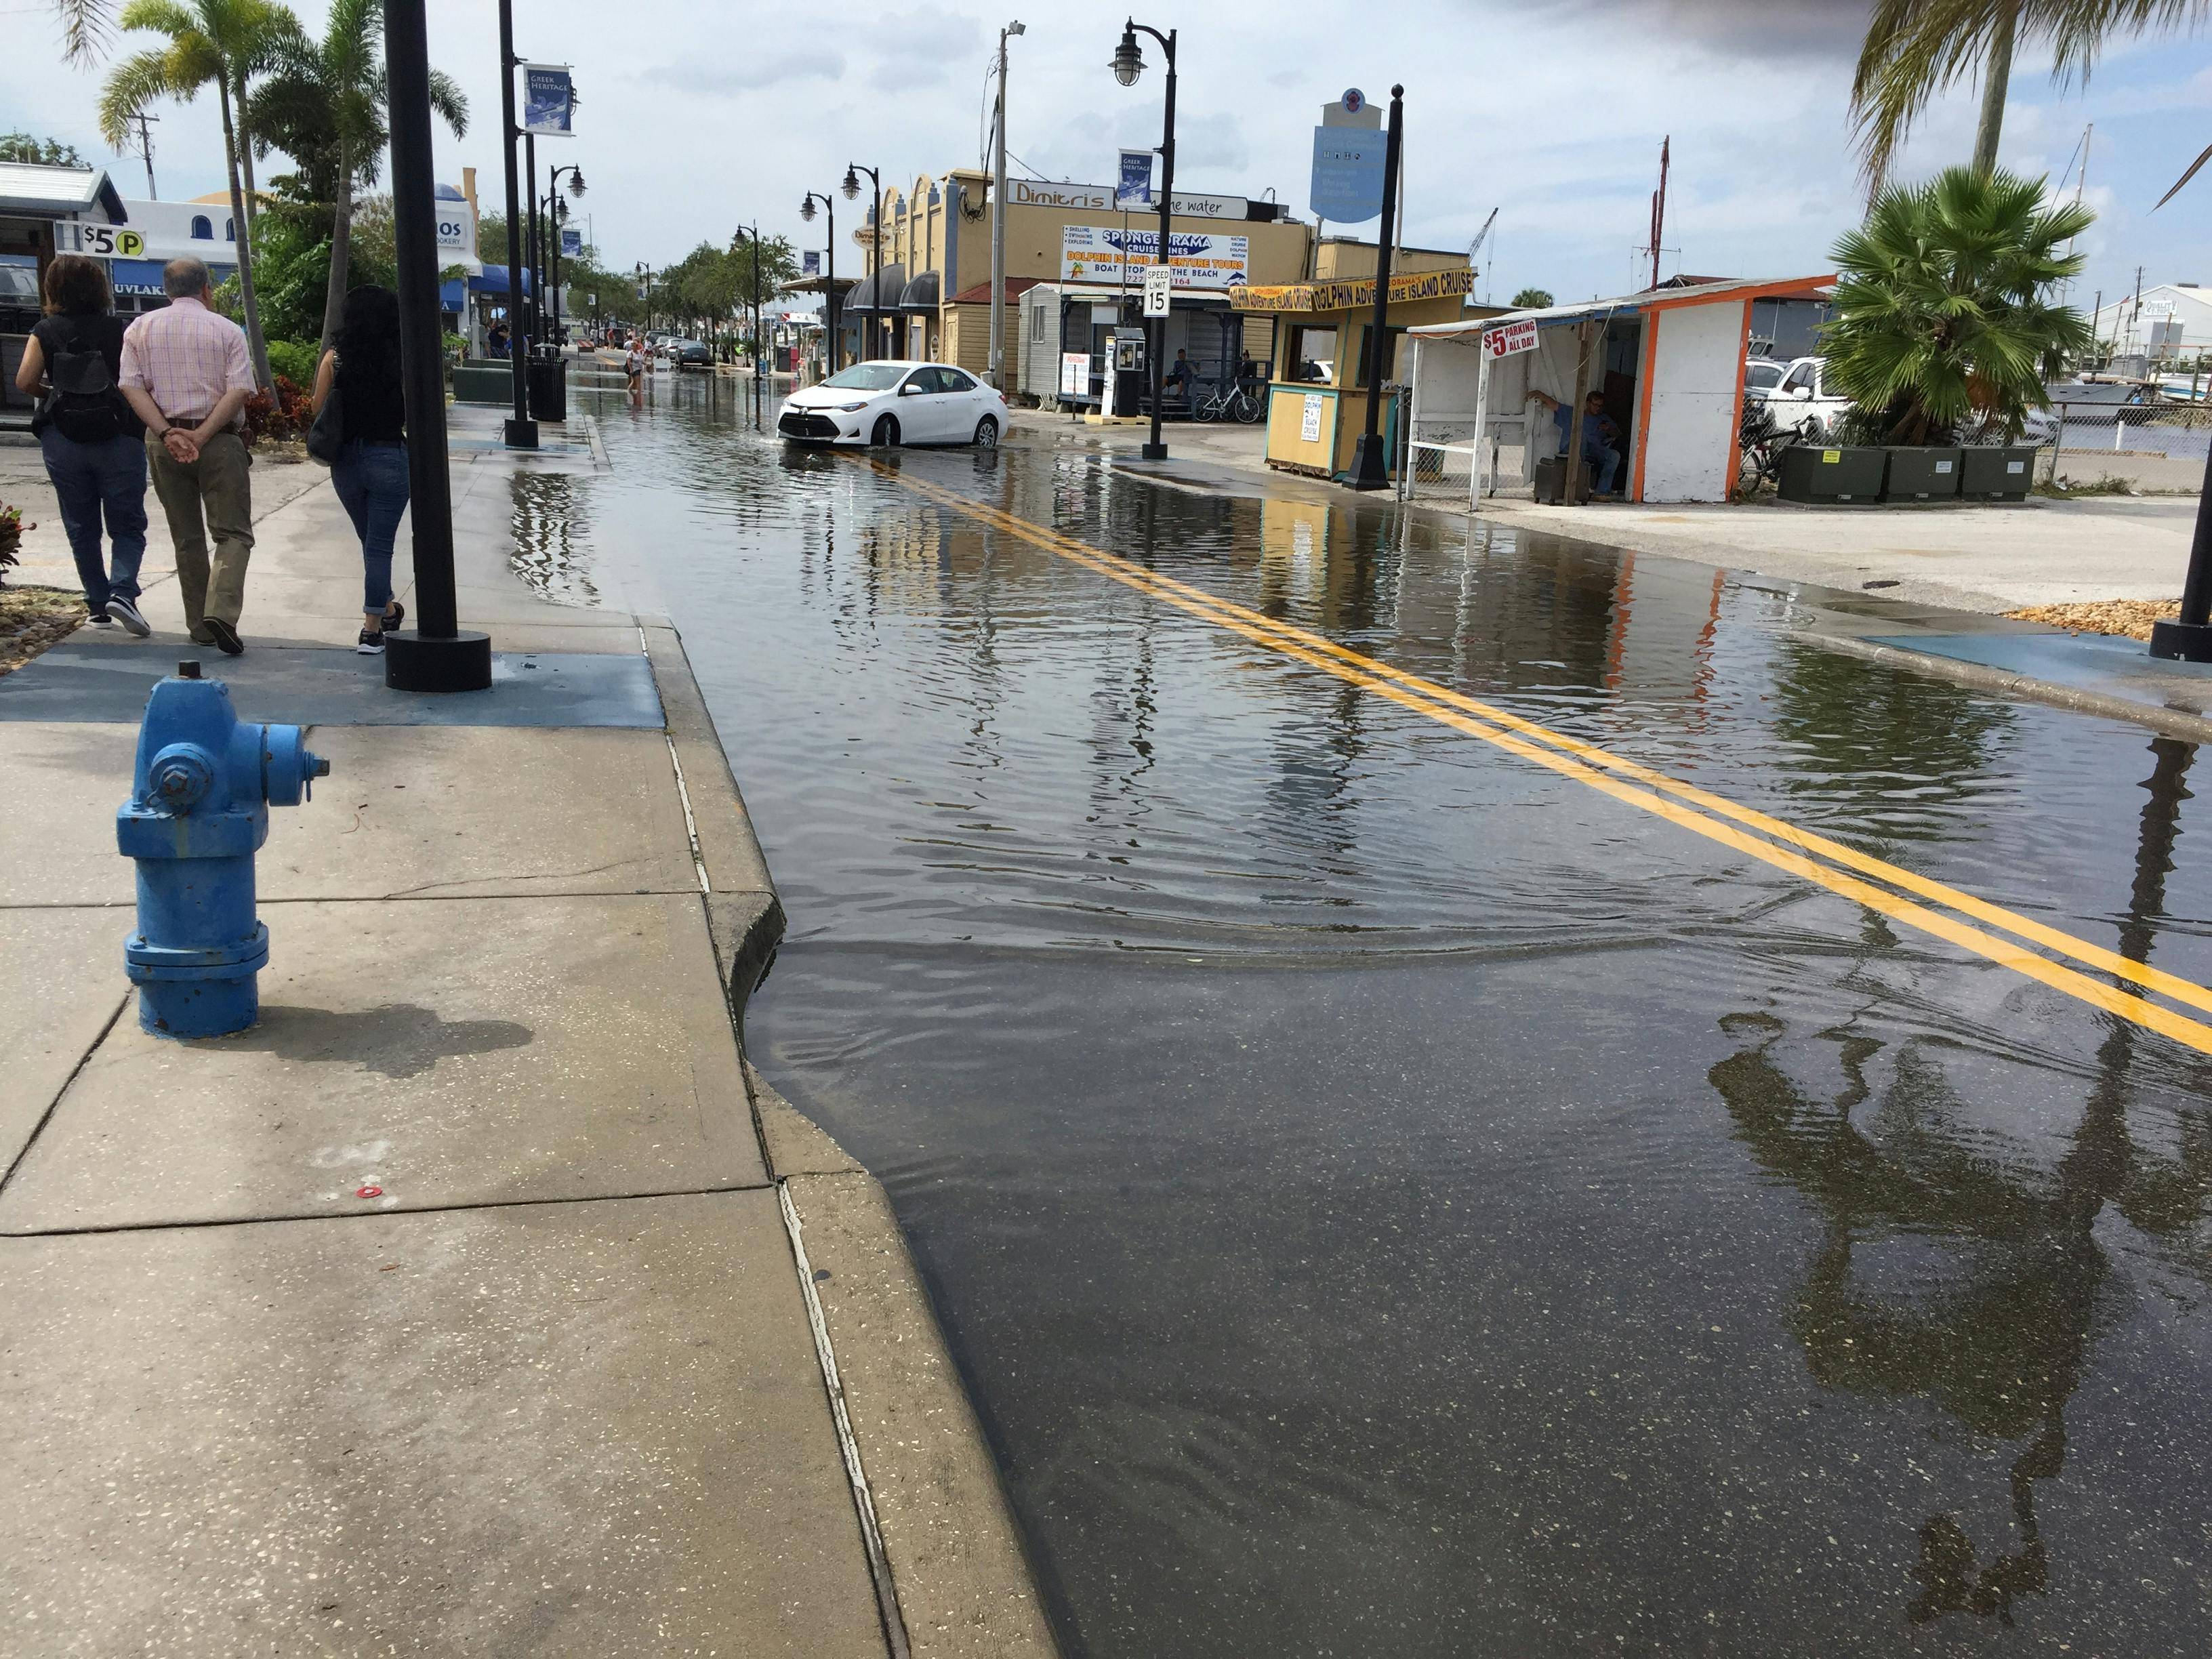 Image of Dodecanese Blvd. flooded